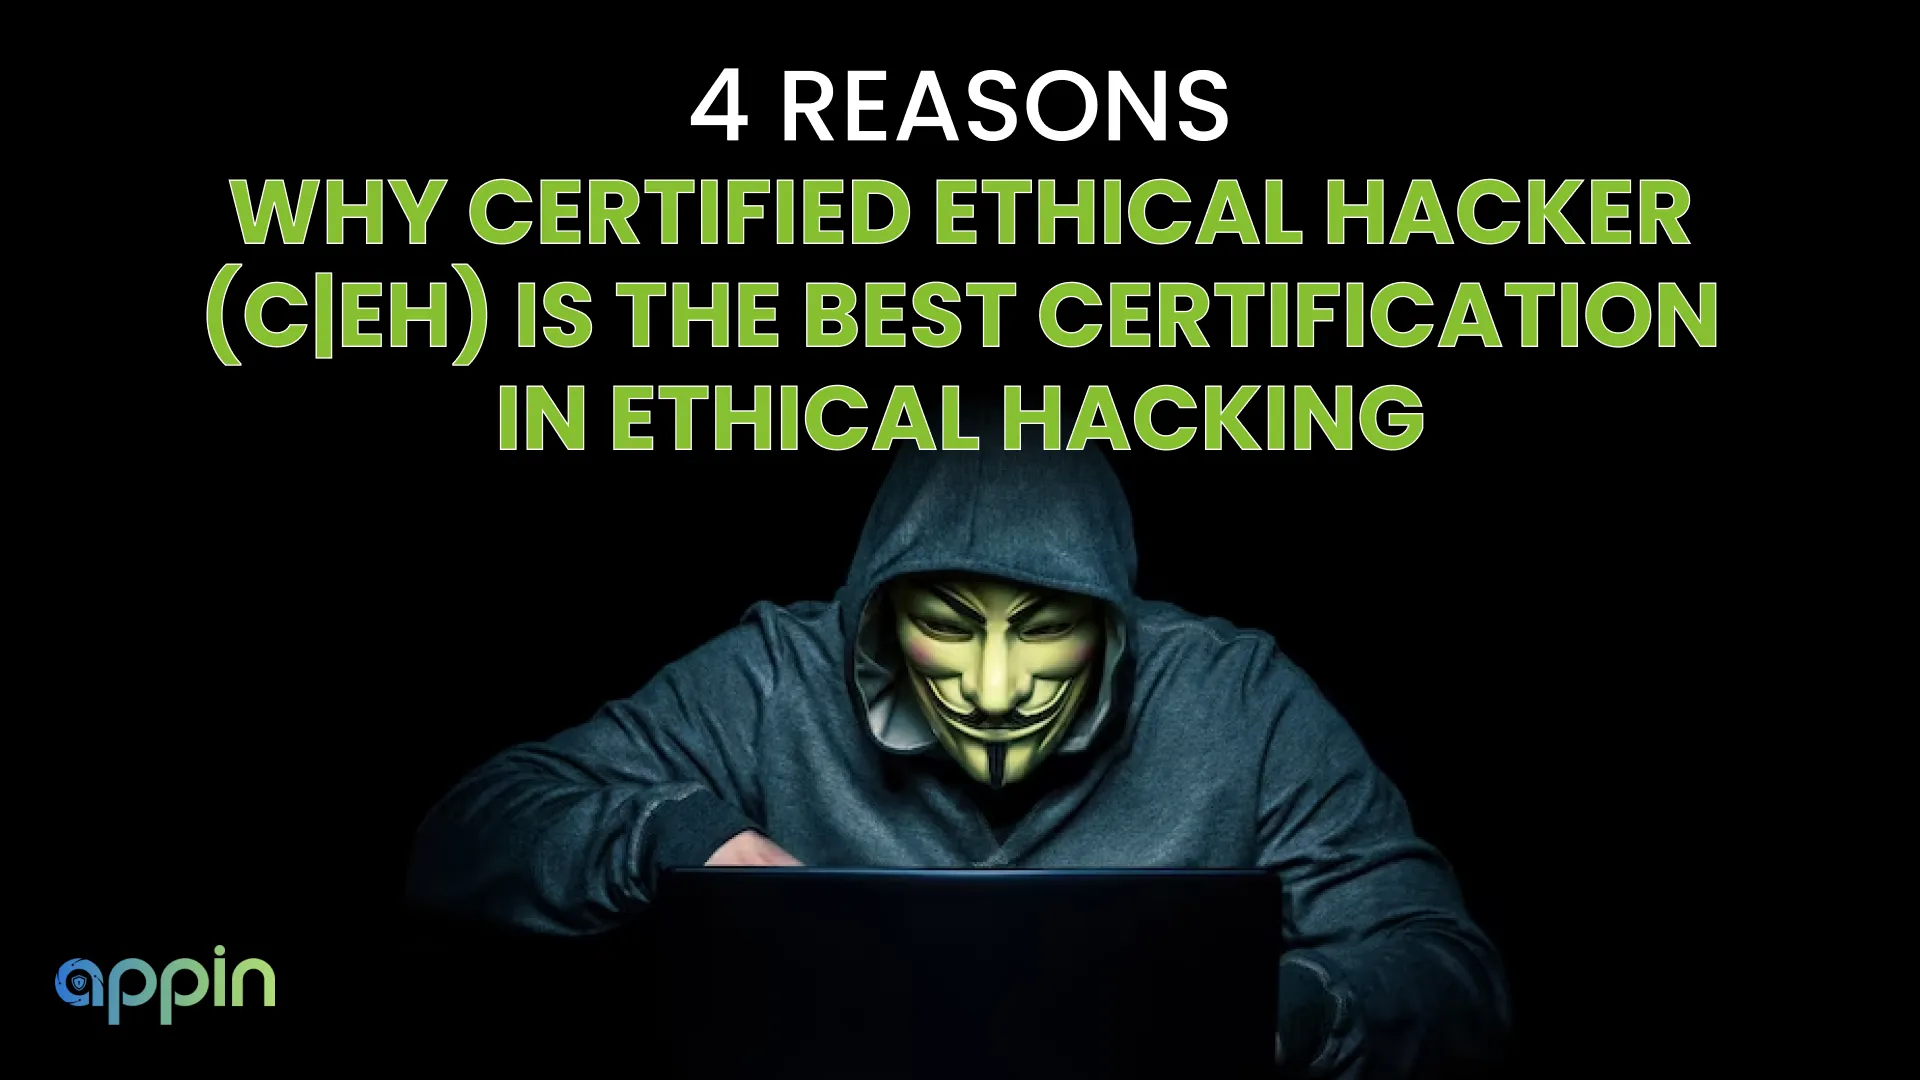 4 reasons why certified ethical hacker is the best certification in ethical hacking